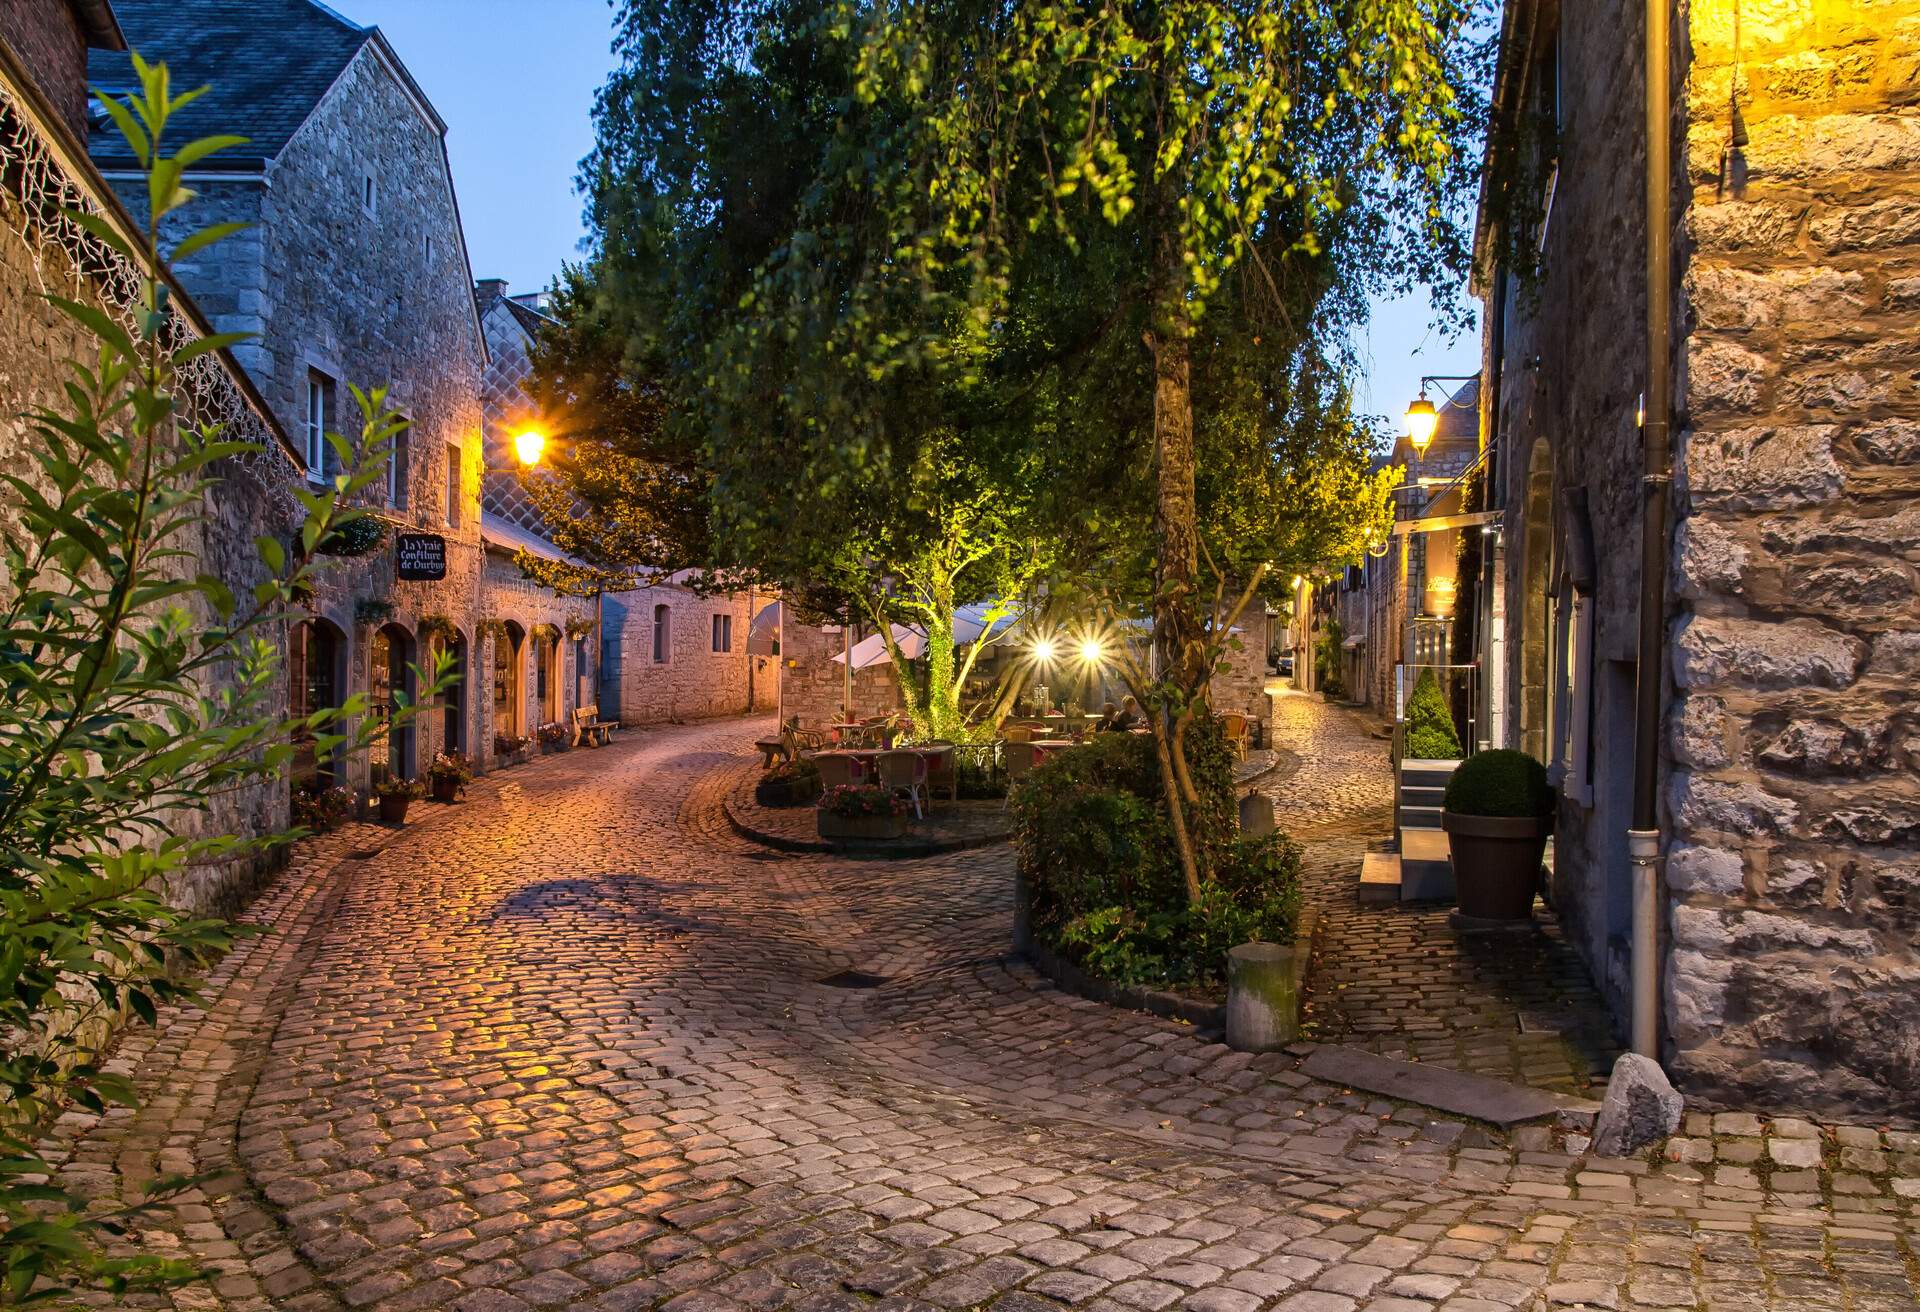 View  of paved street by night in Durbuy.Known as the smallest town on earth Durbuy is also one of the prettiest.Durbuy is a Walloon city and municipality located in the Belgian province of Luxembourg.